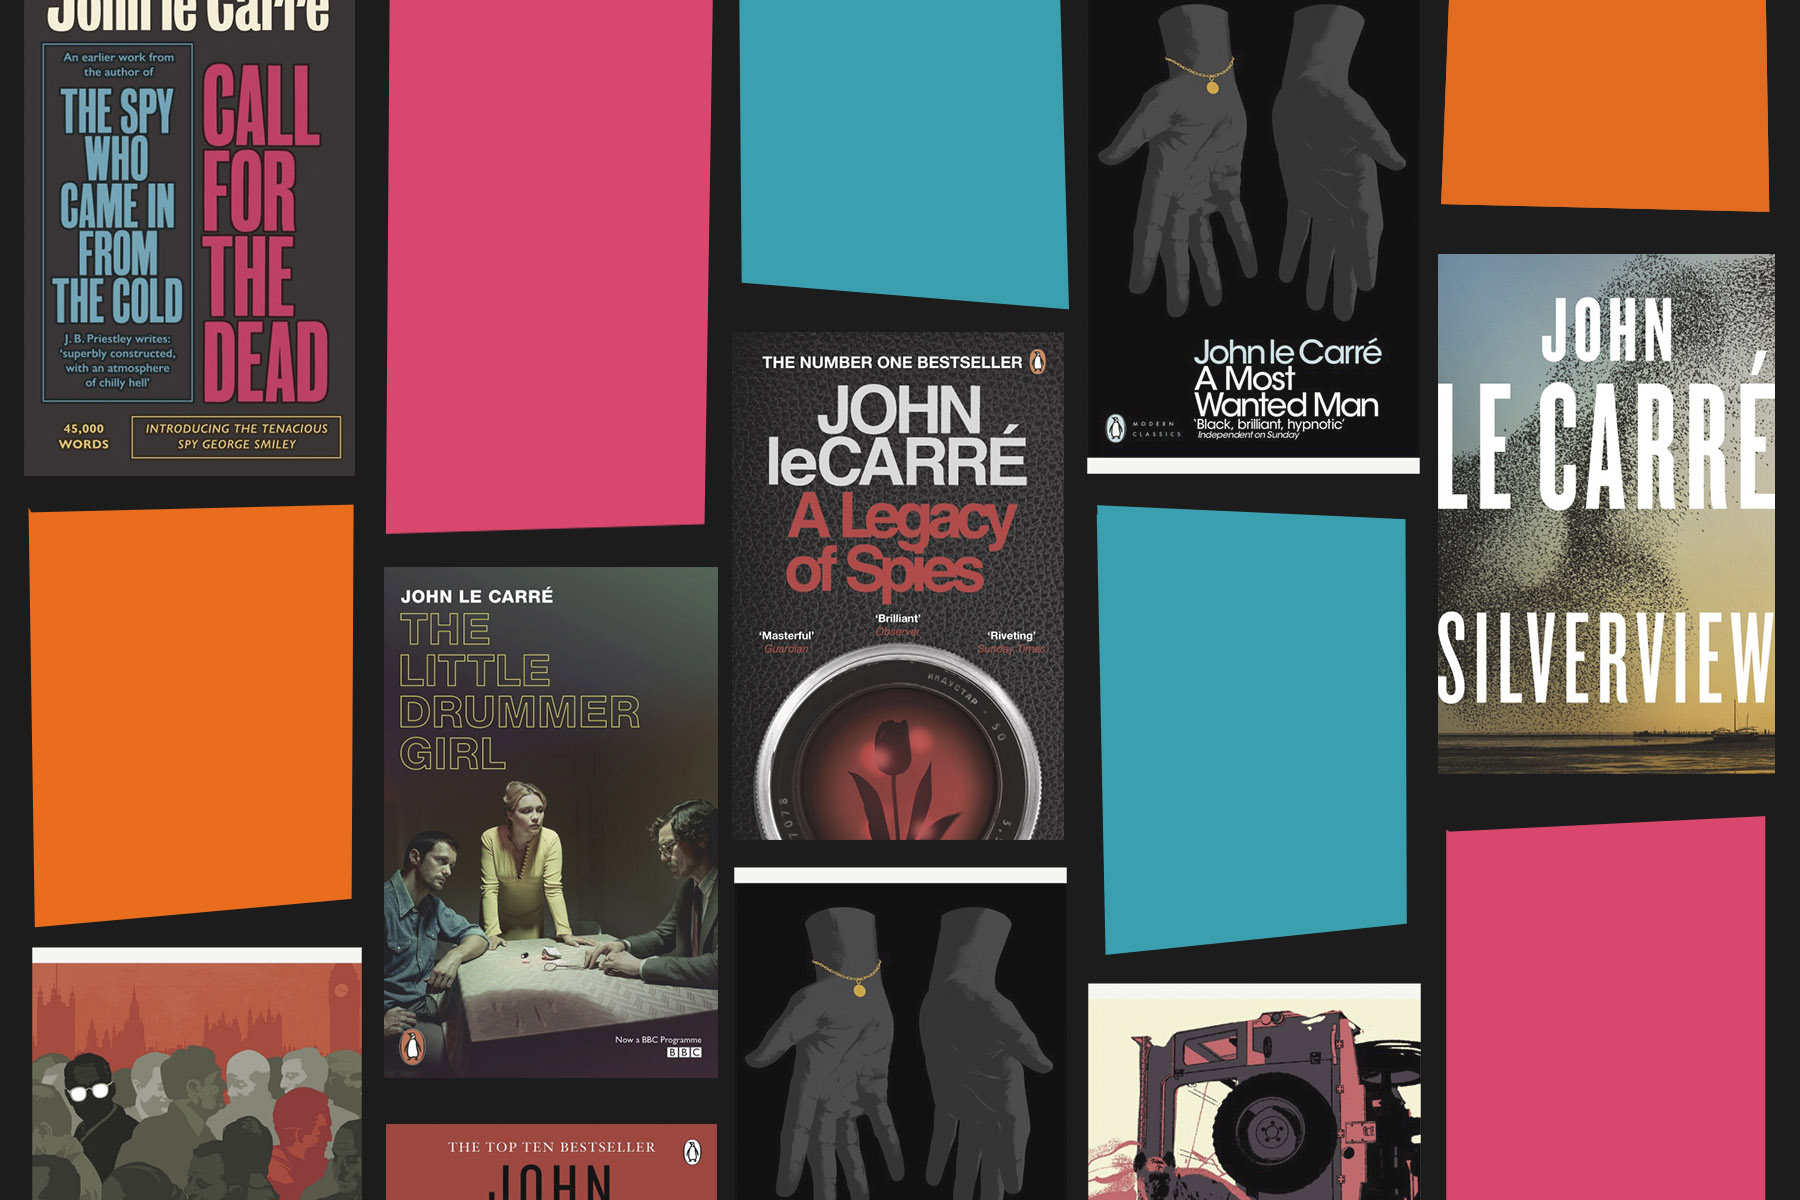 Image of coloured blocks and John le Carre book covers on a black background